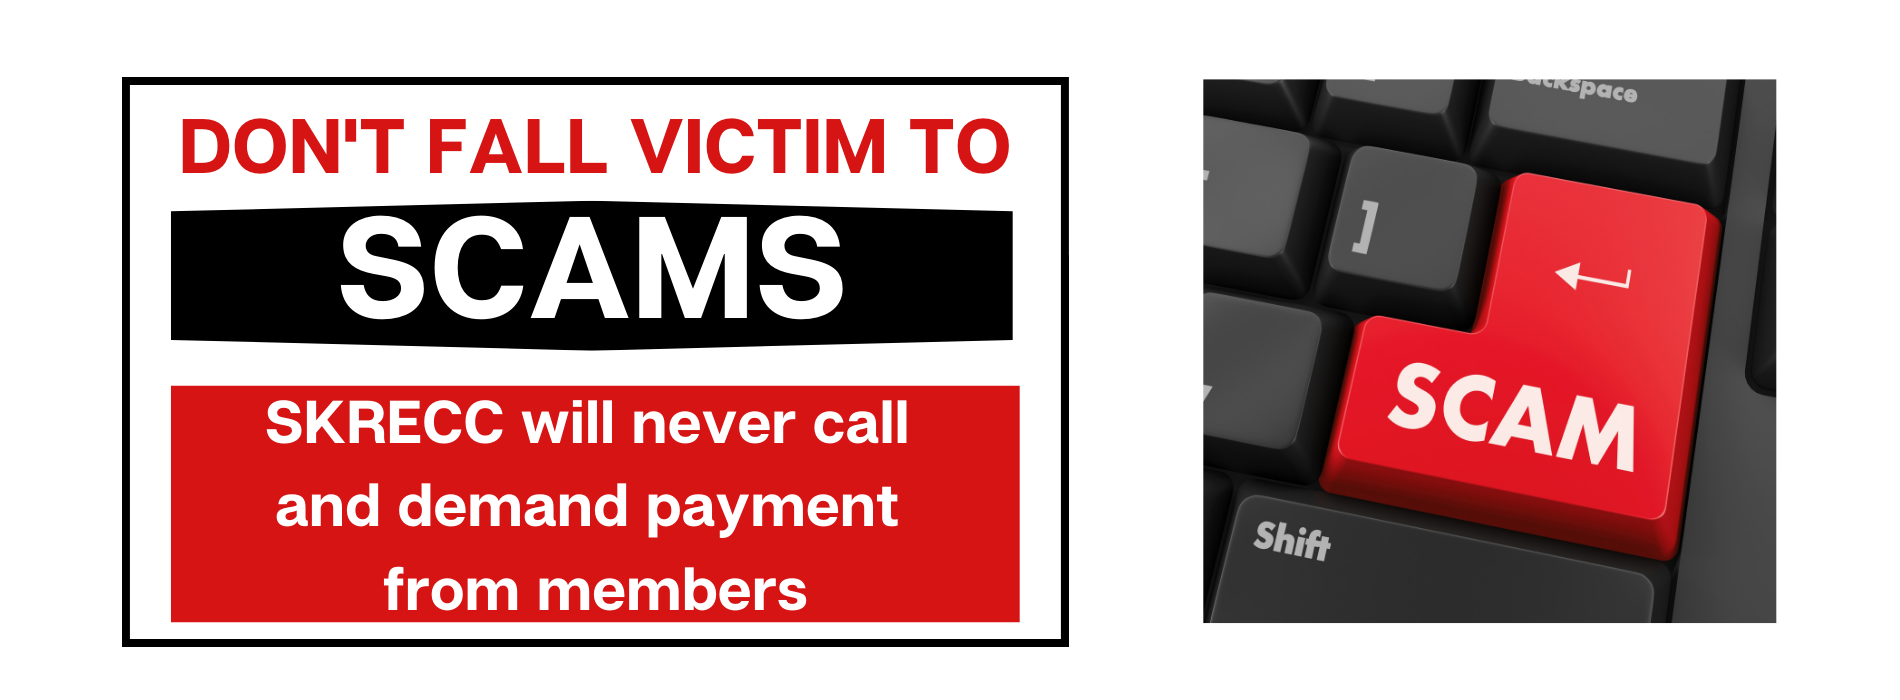 DON'T BE A VICTIM OF SCAMS